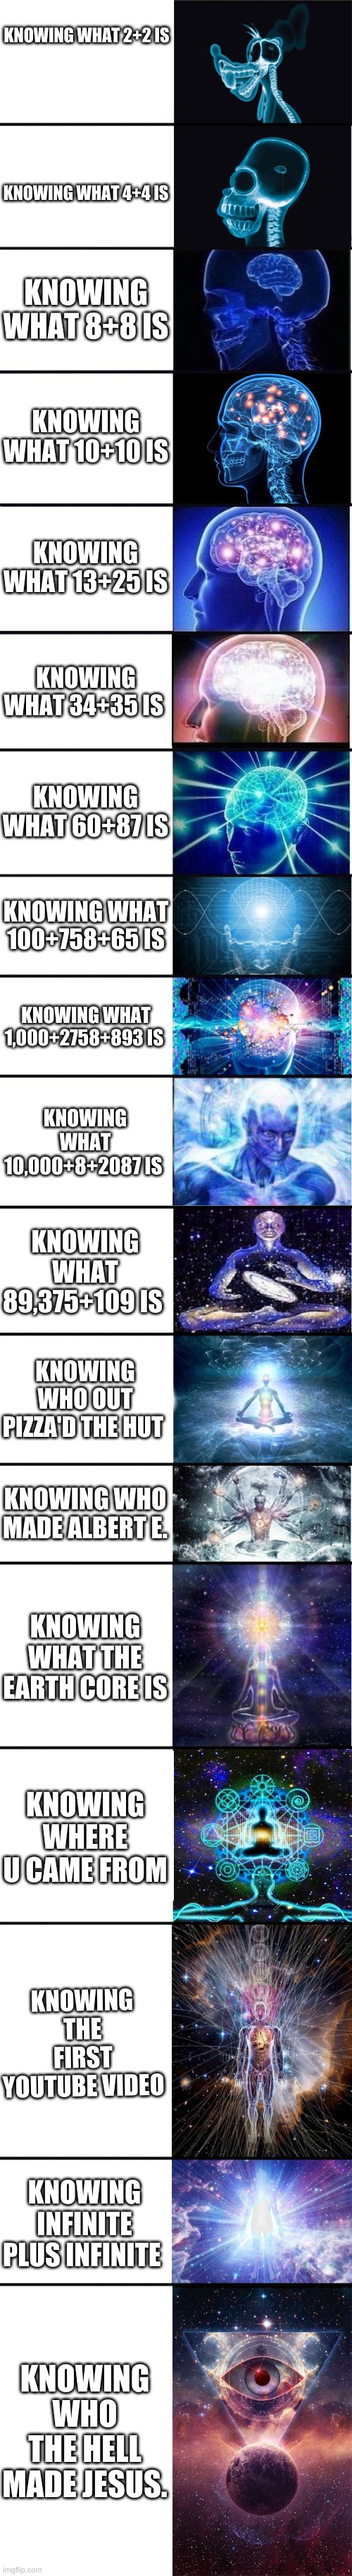 Expanding brain 9001 | KNOWING WHAT 2+2 IS; KNOWING WHAT 4+4 IS; KNOWING WHAT 8+8 IS; KNOWING WHAT 10+10 IS; KNOWING WHAT 13+25 IS; KNOWING WHAT 34+35 IS; KNOWING WHAT 60+87 IS; KNOWING WHAT 100+758+65 IS; KNOWING WHAT 1,000+2758+893 IS; KNOWING WHAT 10,000+8+2087 IS; KNOWING WHAT 89,375+109 IS; KNOWING WHO OUT PIZZA'D THE HUT; KNOWING WHO MADE ALBERT E. KNOWING WHAT THE EARTH CORE IS; KNOWING WHERE U CAME FROM; KNOWING THE FIRST YOUTUBE VIDEO; KNOWING INFINITE PLUS INFINITE; KNOWING WHO THE HELL MADE JESUS. | image tagged in expanding brain 9001,i am smort,hehe boi,brains | made w/ Imgflip meme maker